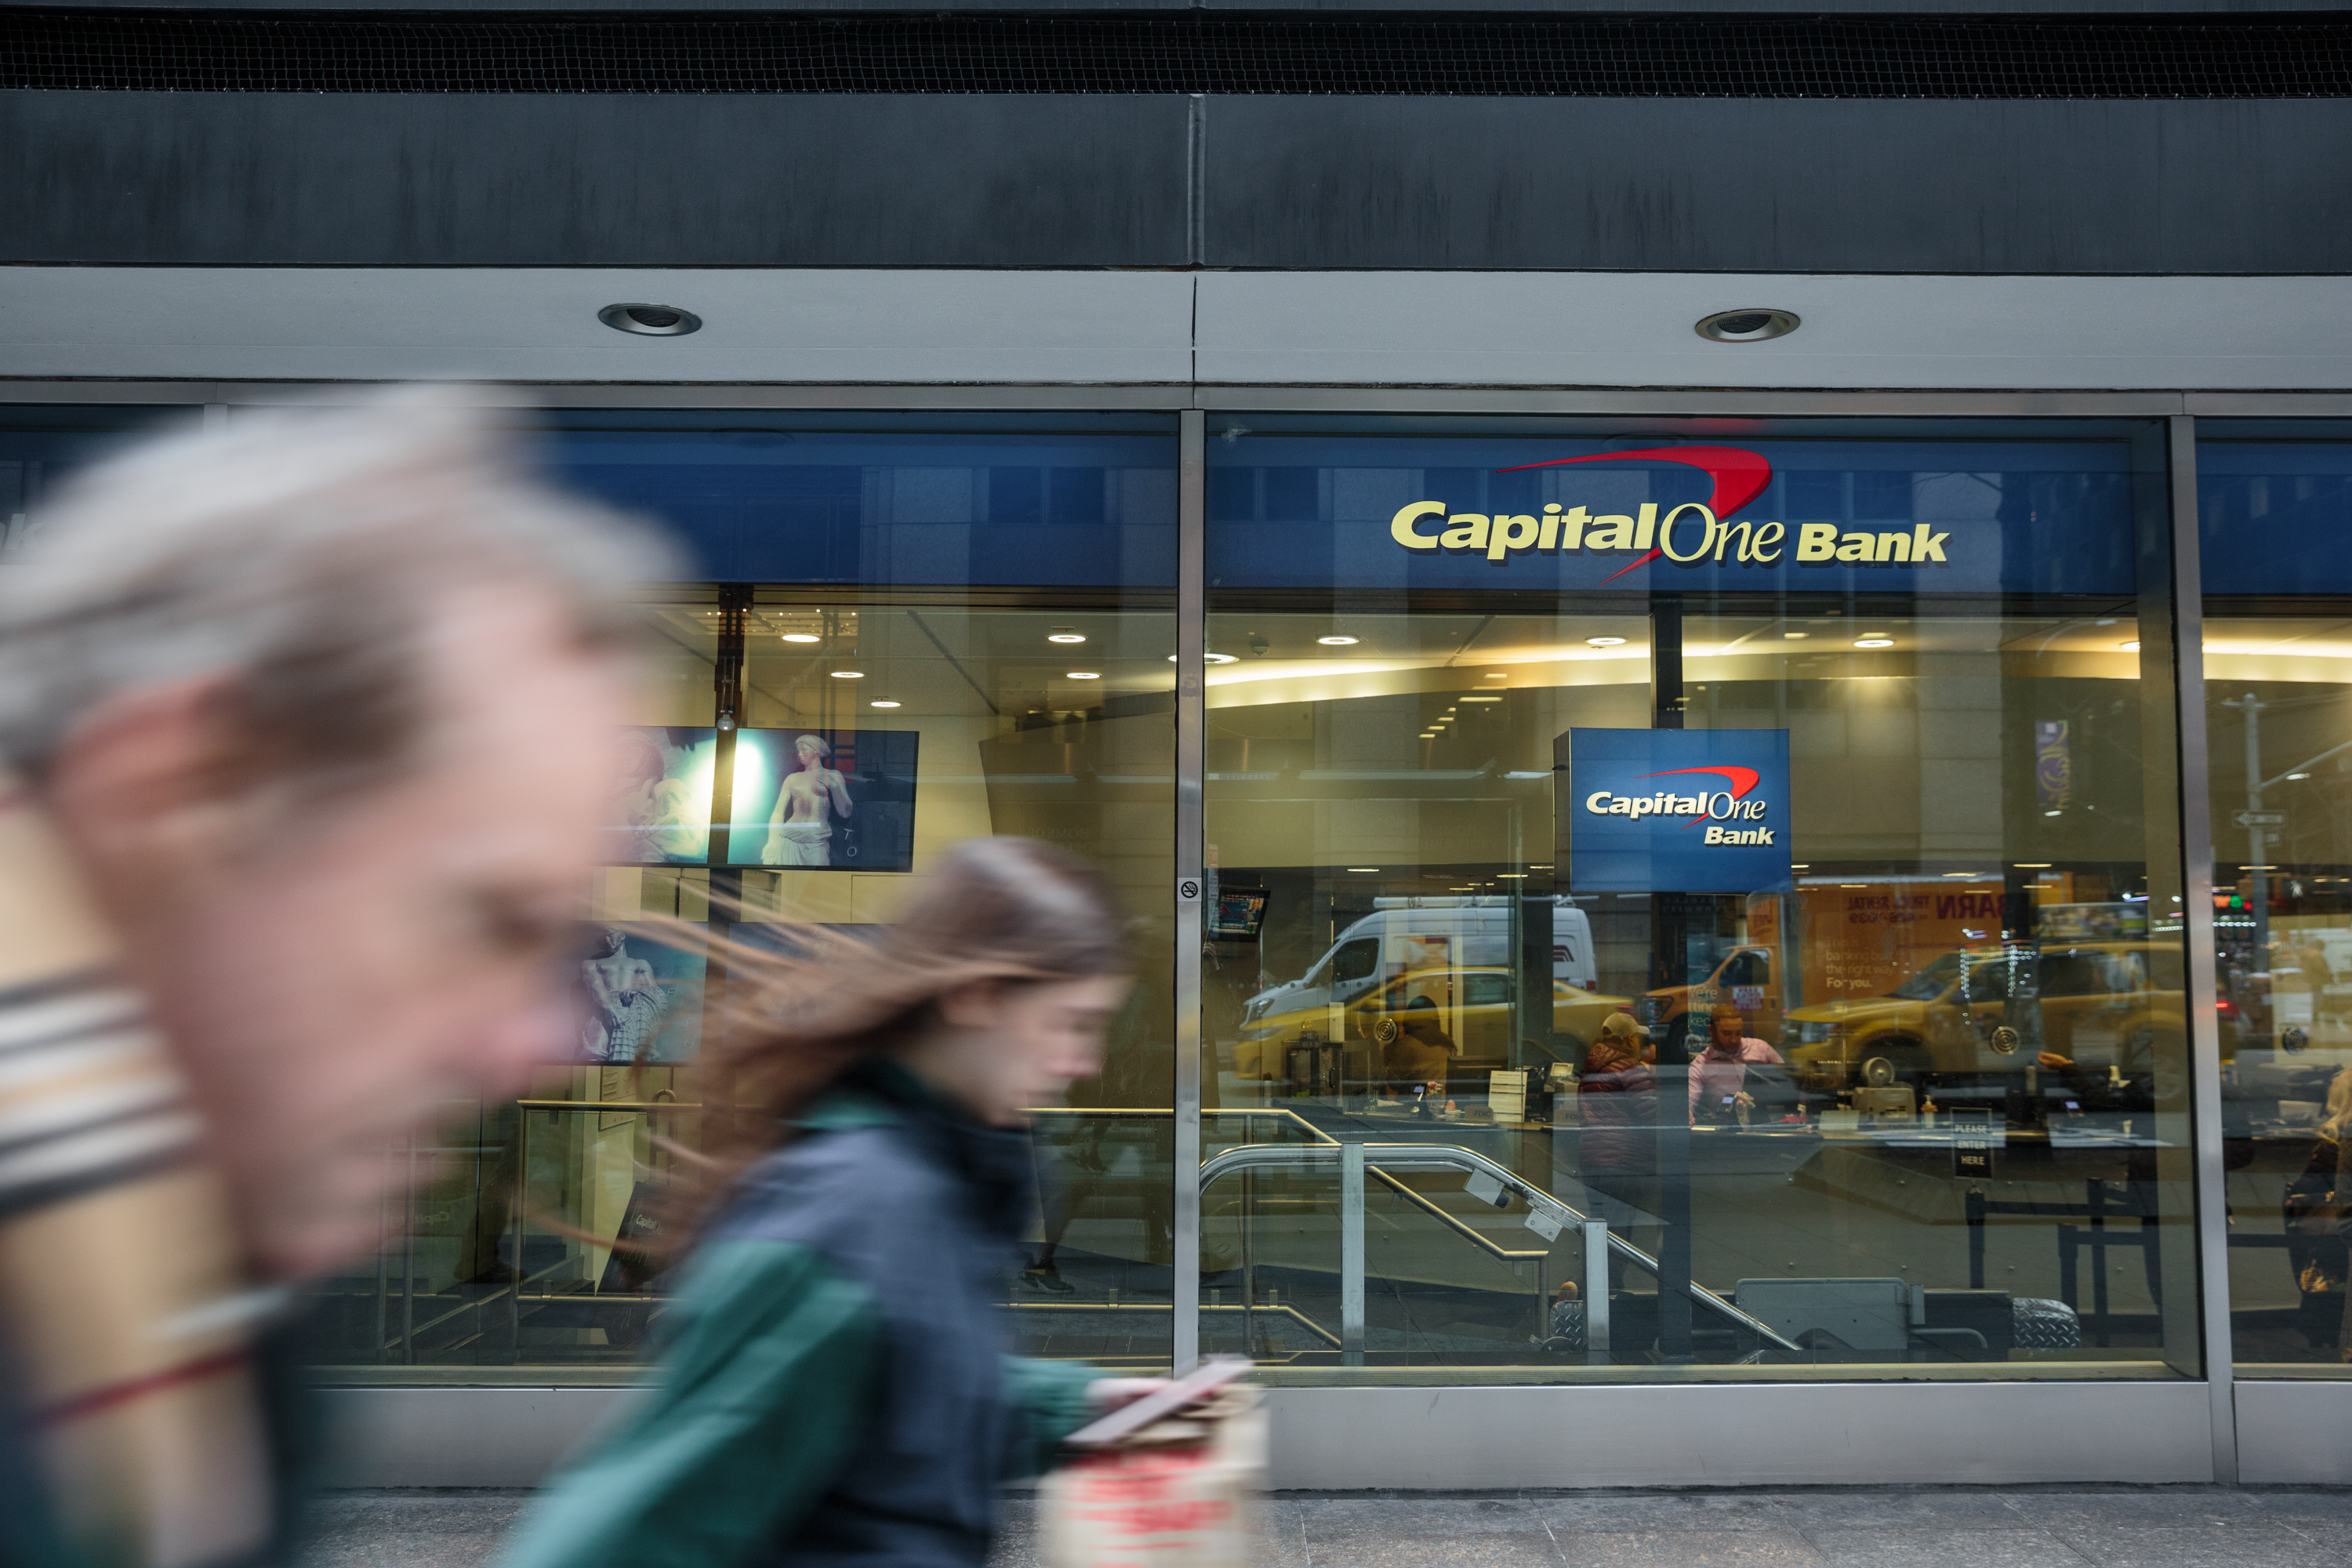 Pedestrians pass in front of a Capital One Financial Corp. bank branch in New York, U.S. Photographer: Sarah Blesener/Bloomberg